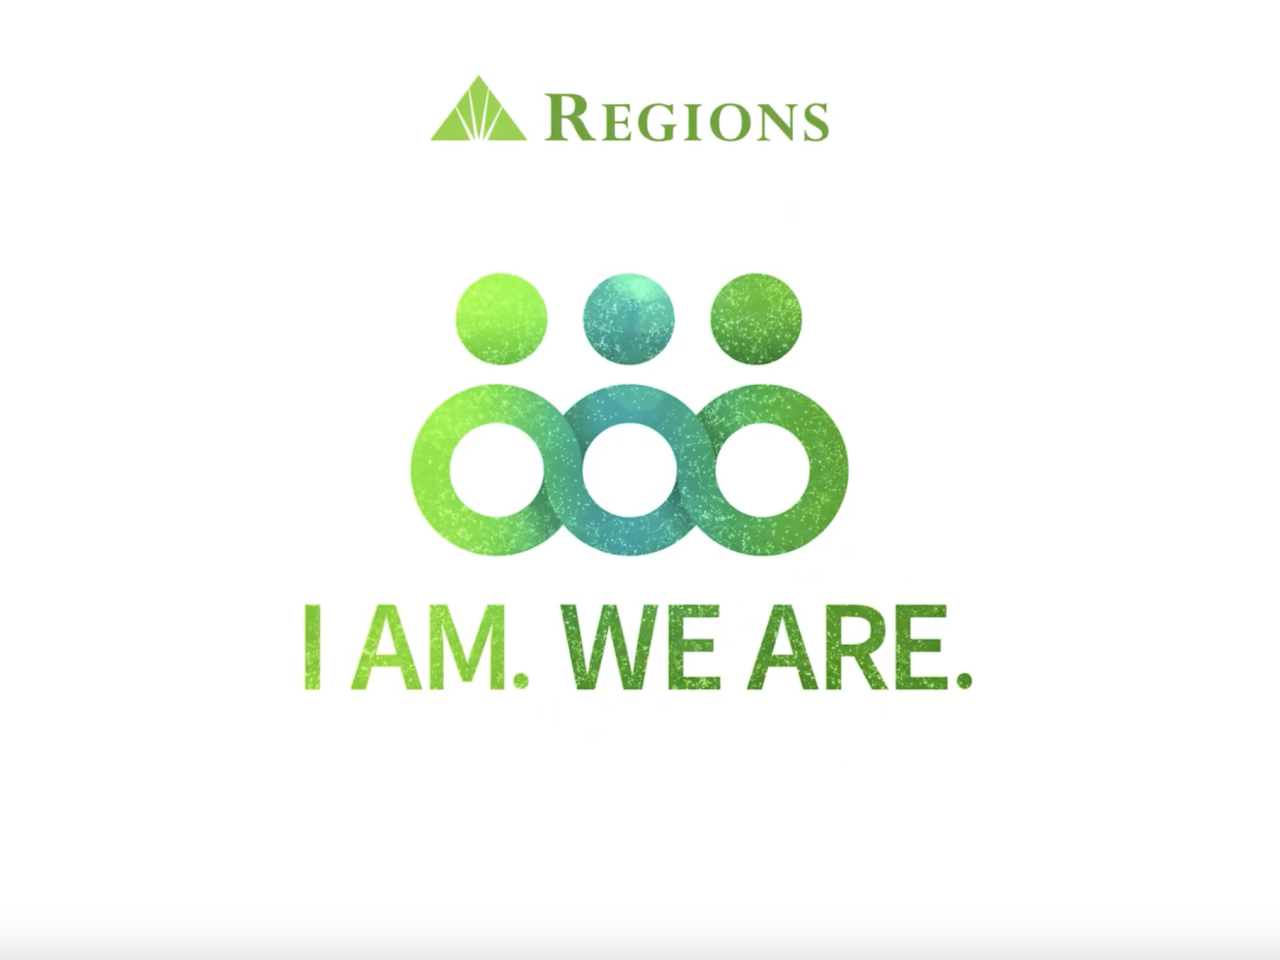 Regions and I AM. WE ARE. logos